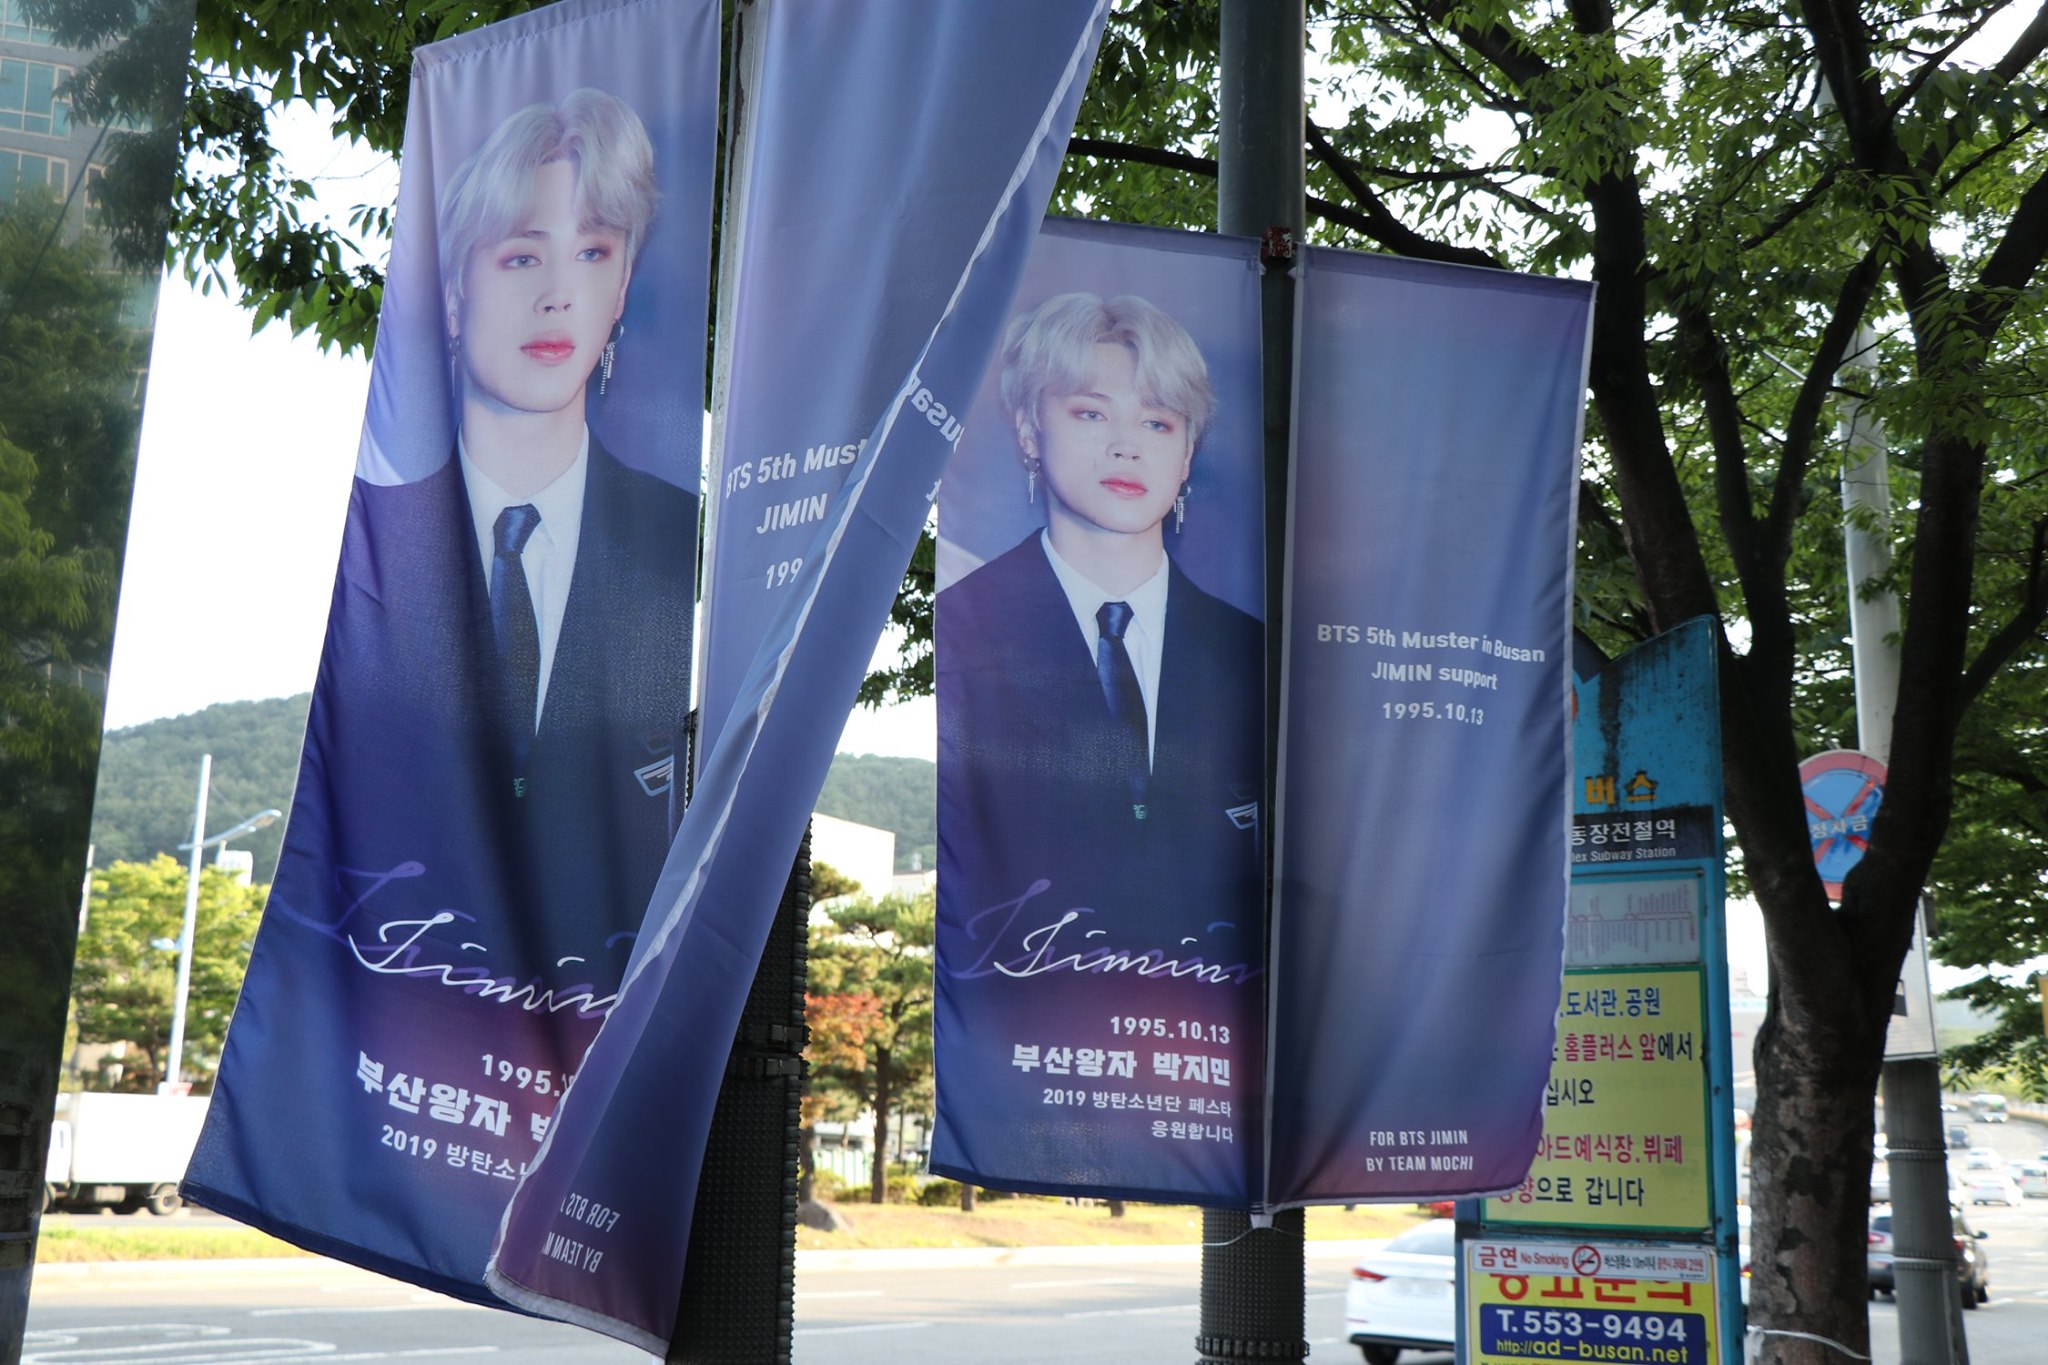 Busan is on alert because of the BTS fan meeting